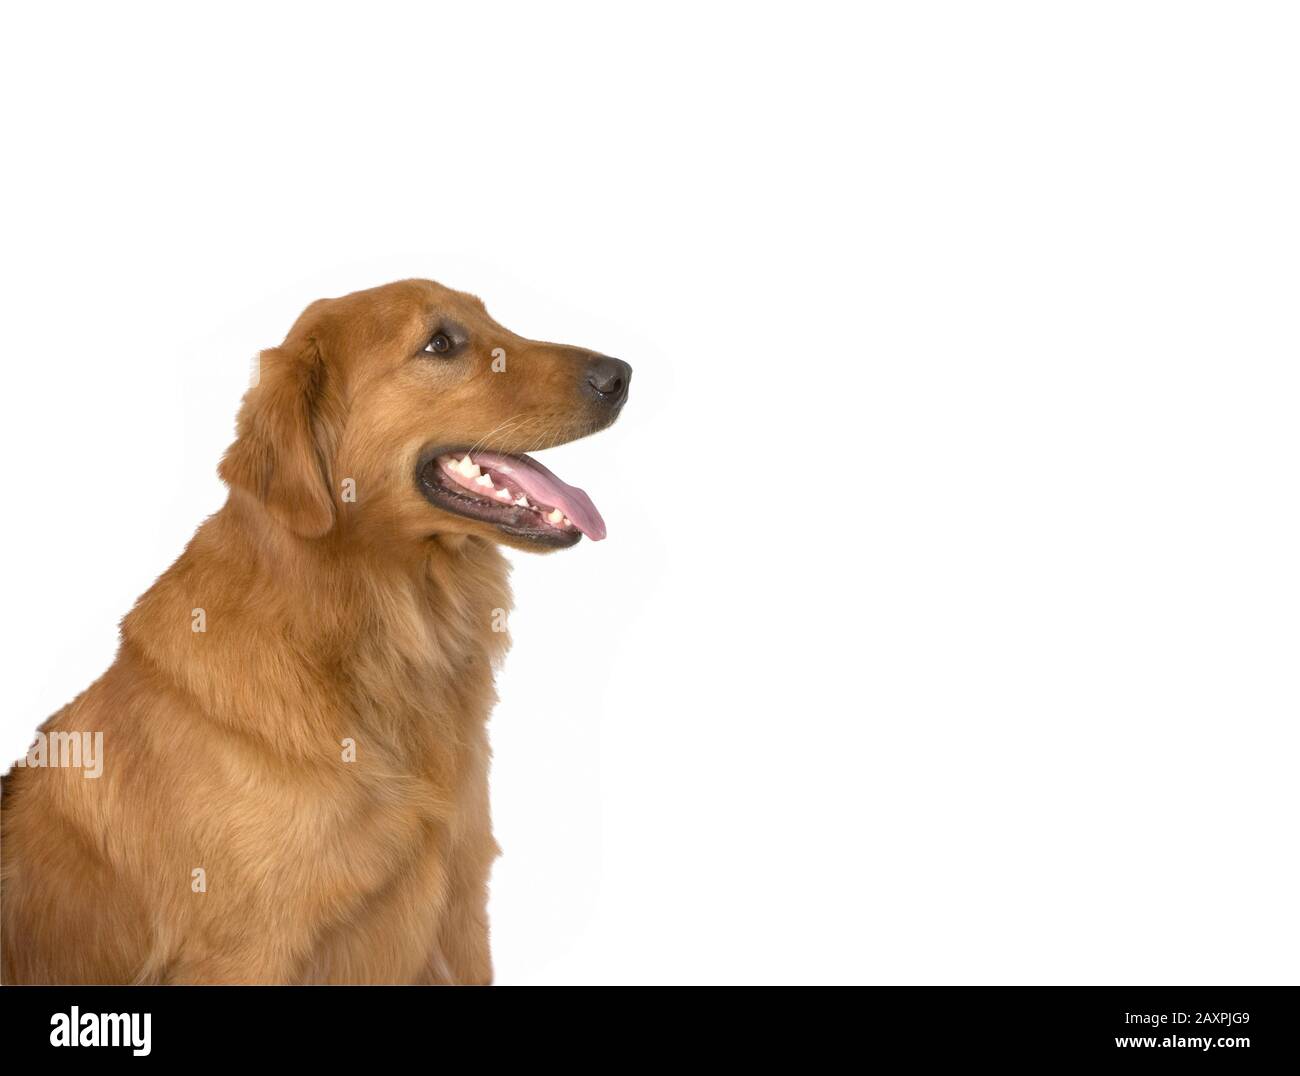 A happy and healthy portrait of a Golden Retriever on a white background Stock Photo